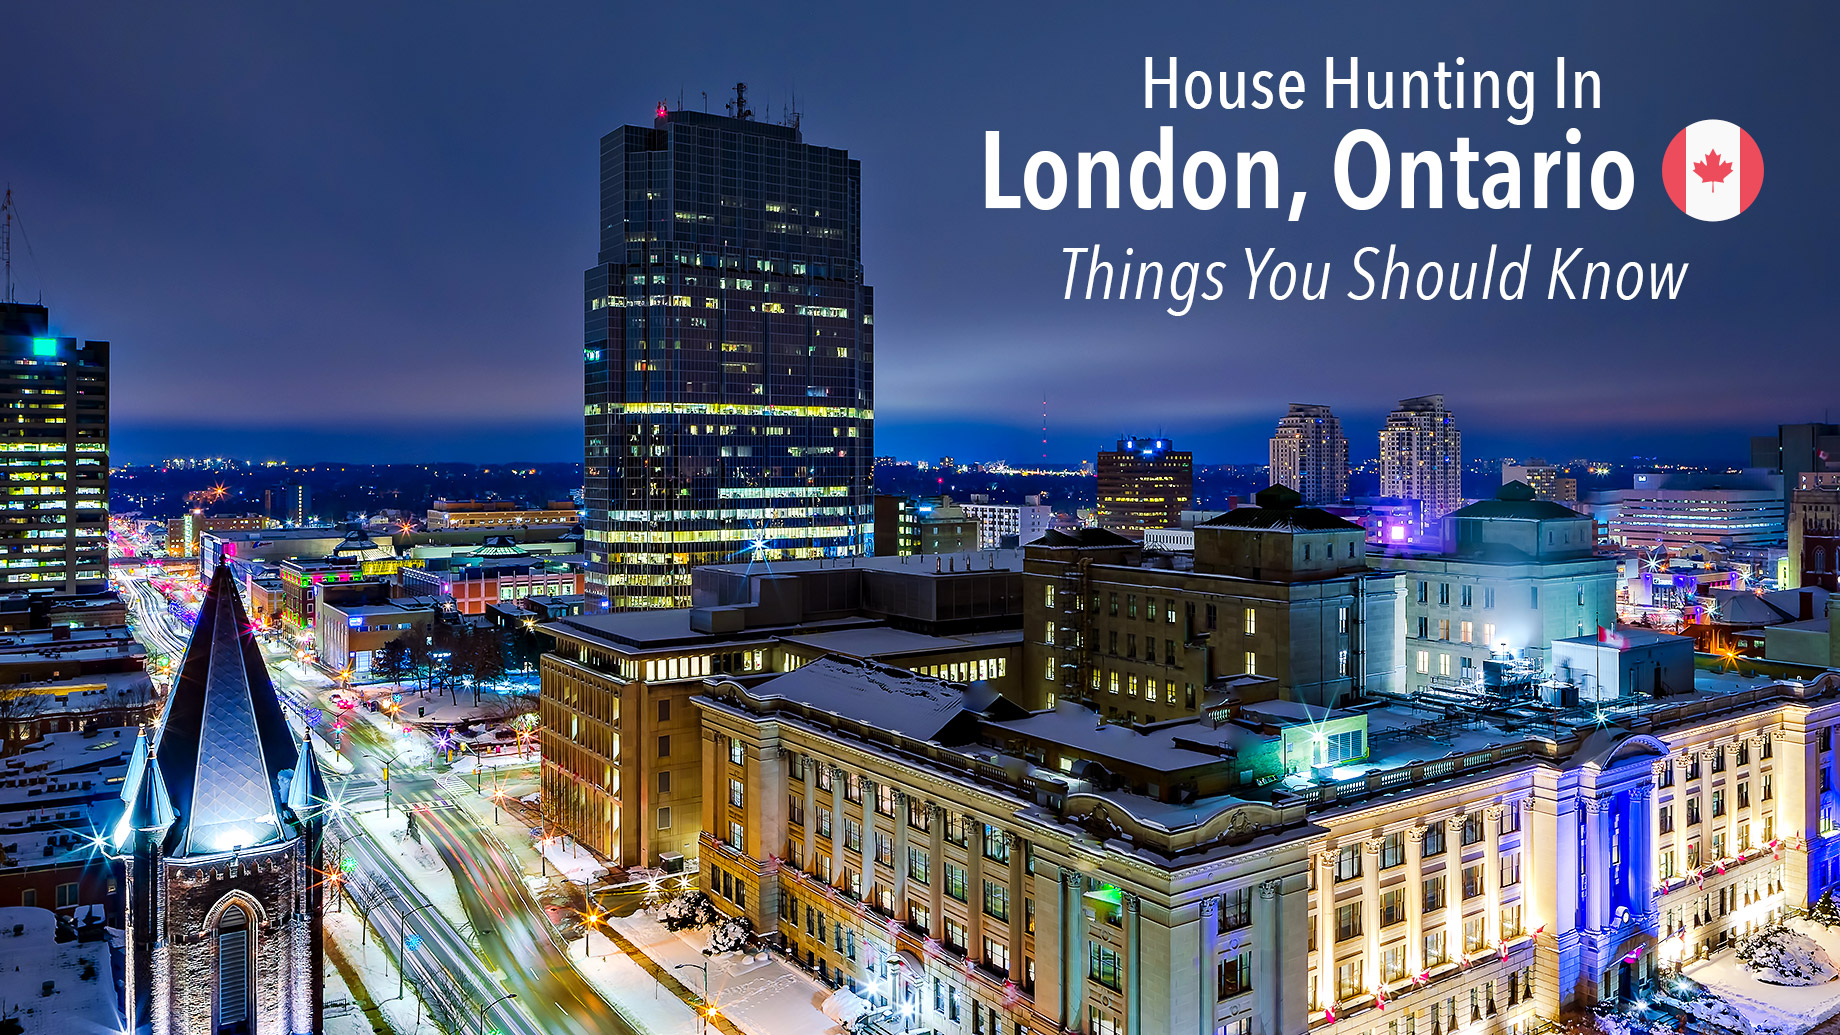 House Hunting In London, Ontario, Canada - Things You Should Know